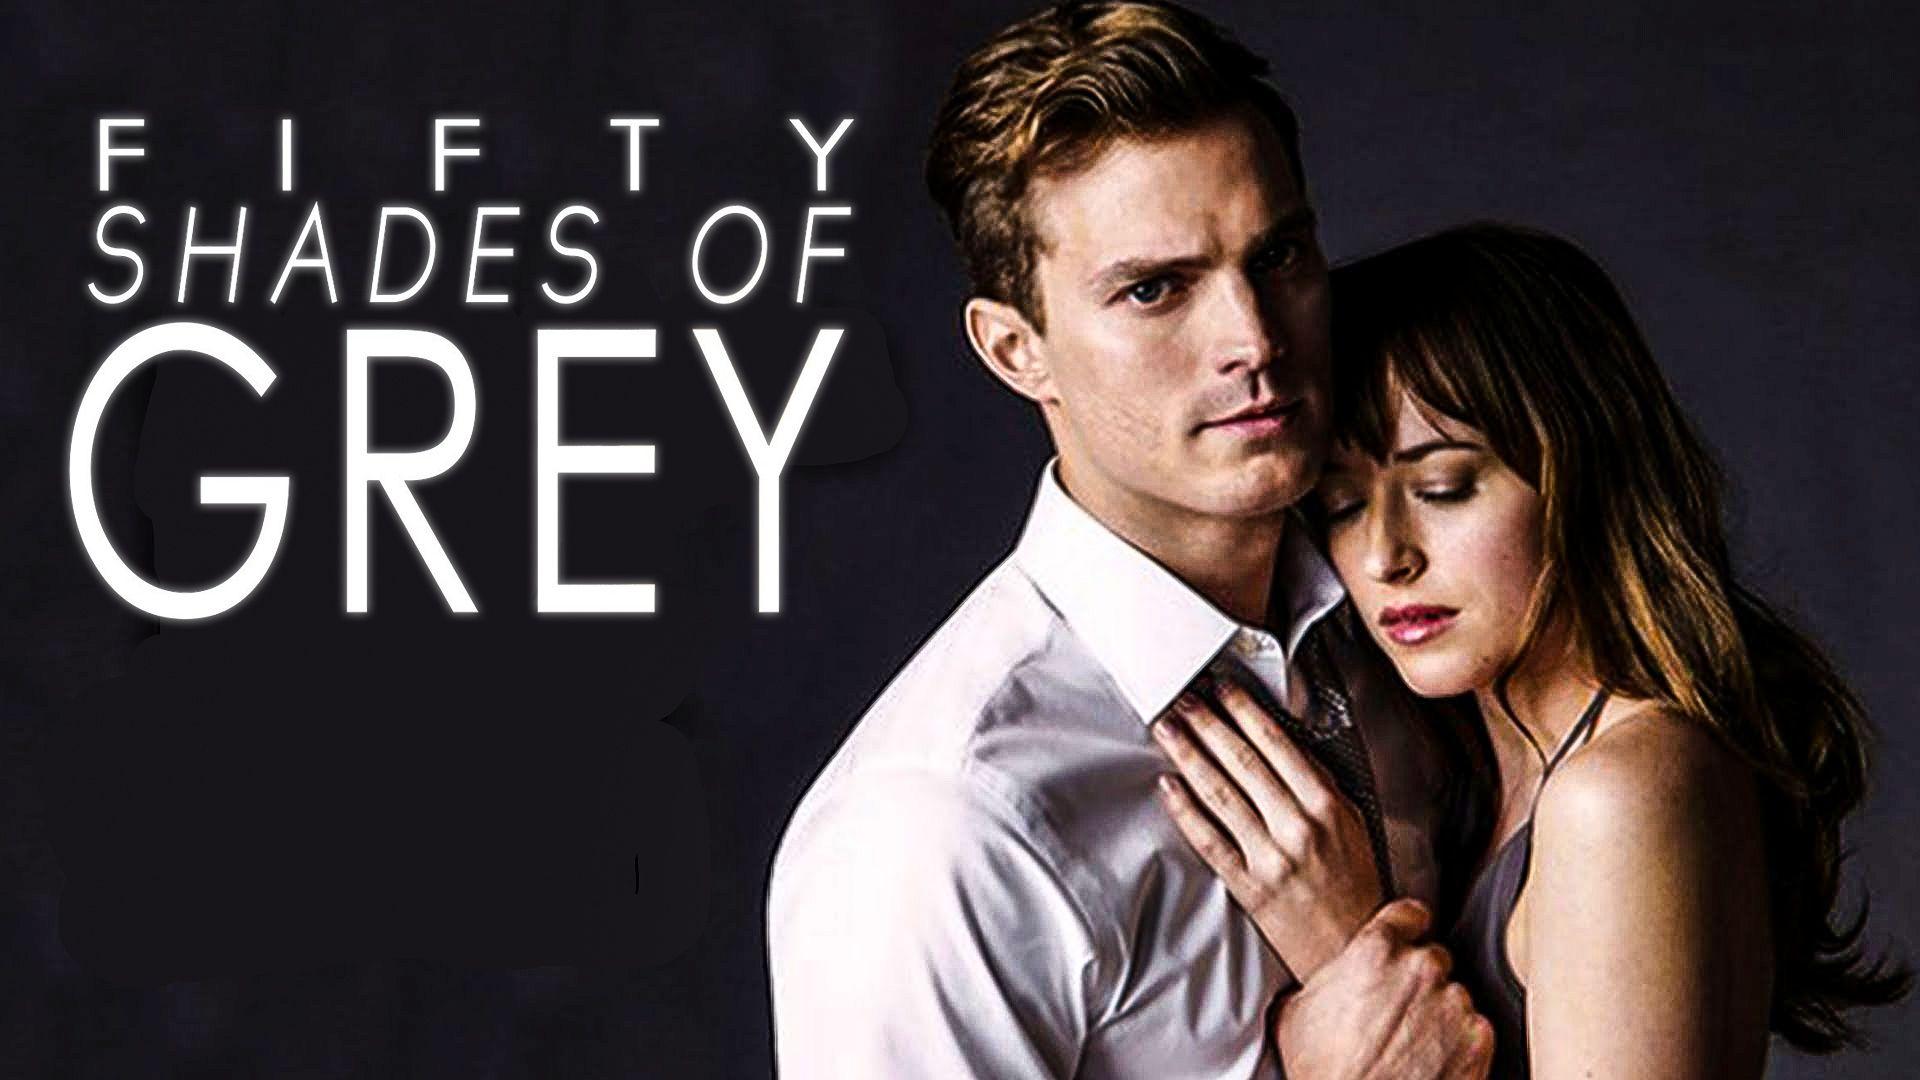 Fifty Shades Of Grey Wallpapers - Wallpaper Cave